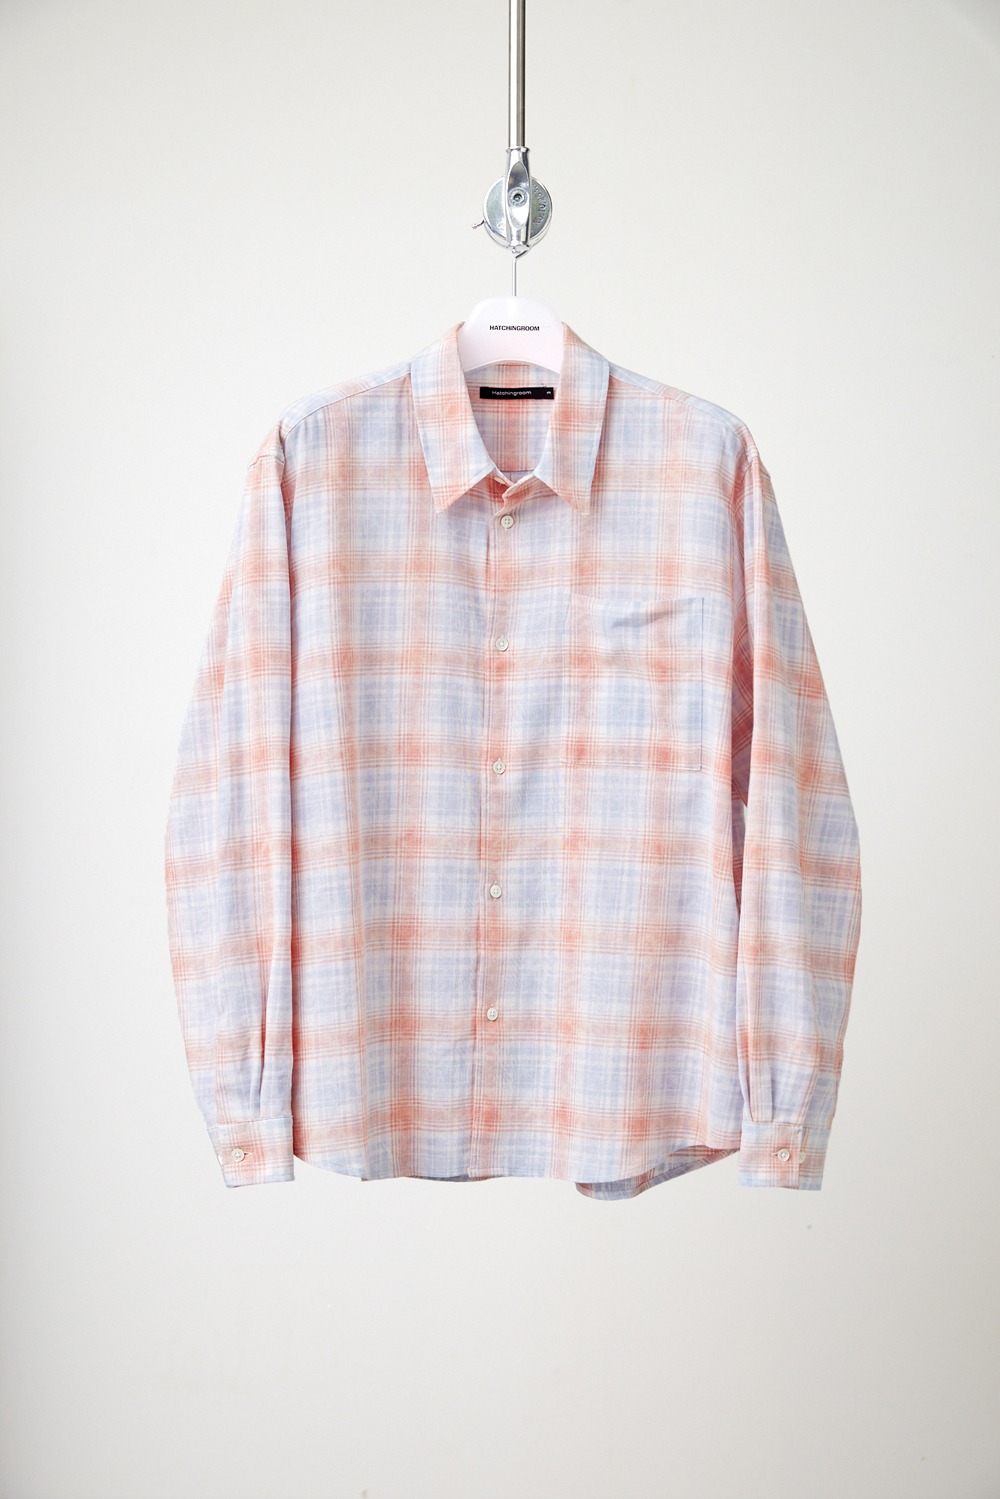 Museum Shirt (Tie Dyed Check)-Coral